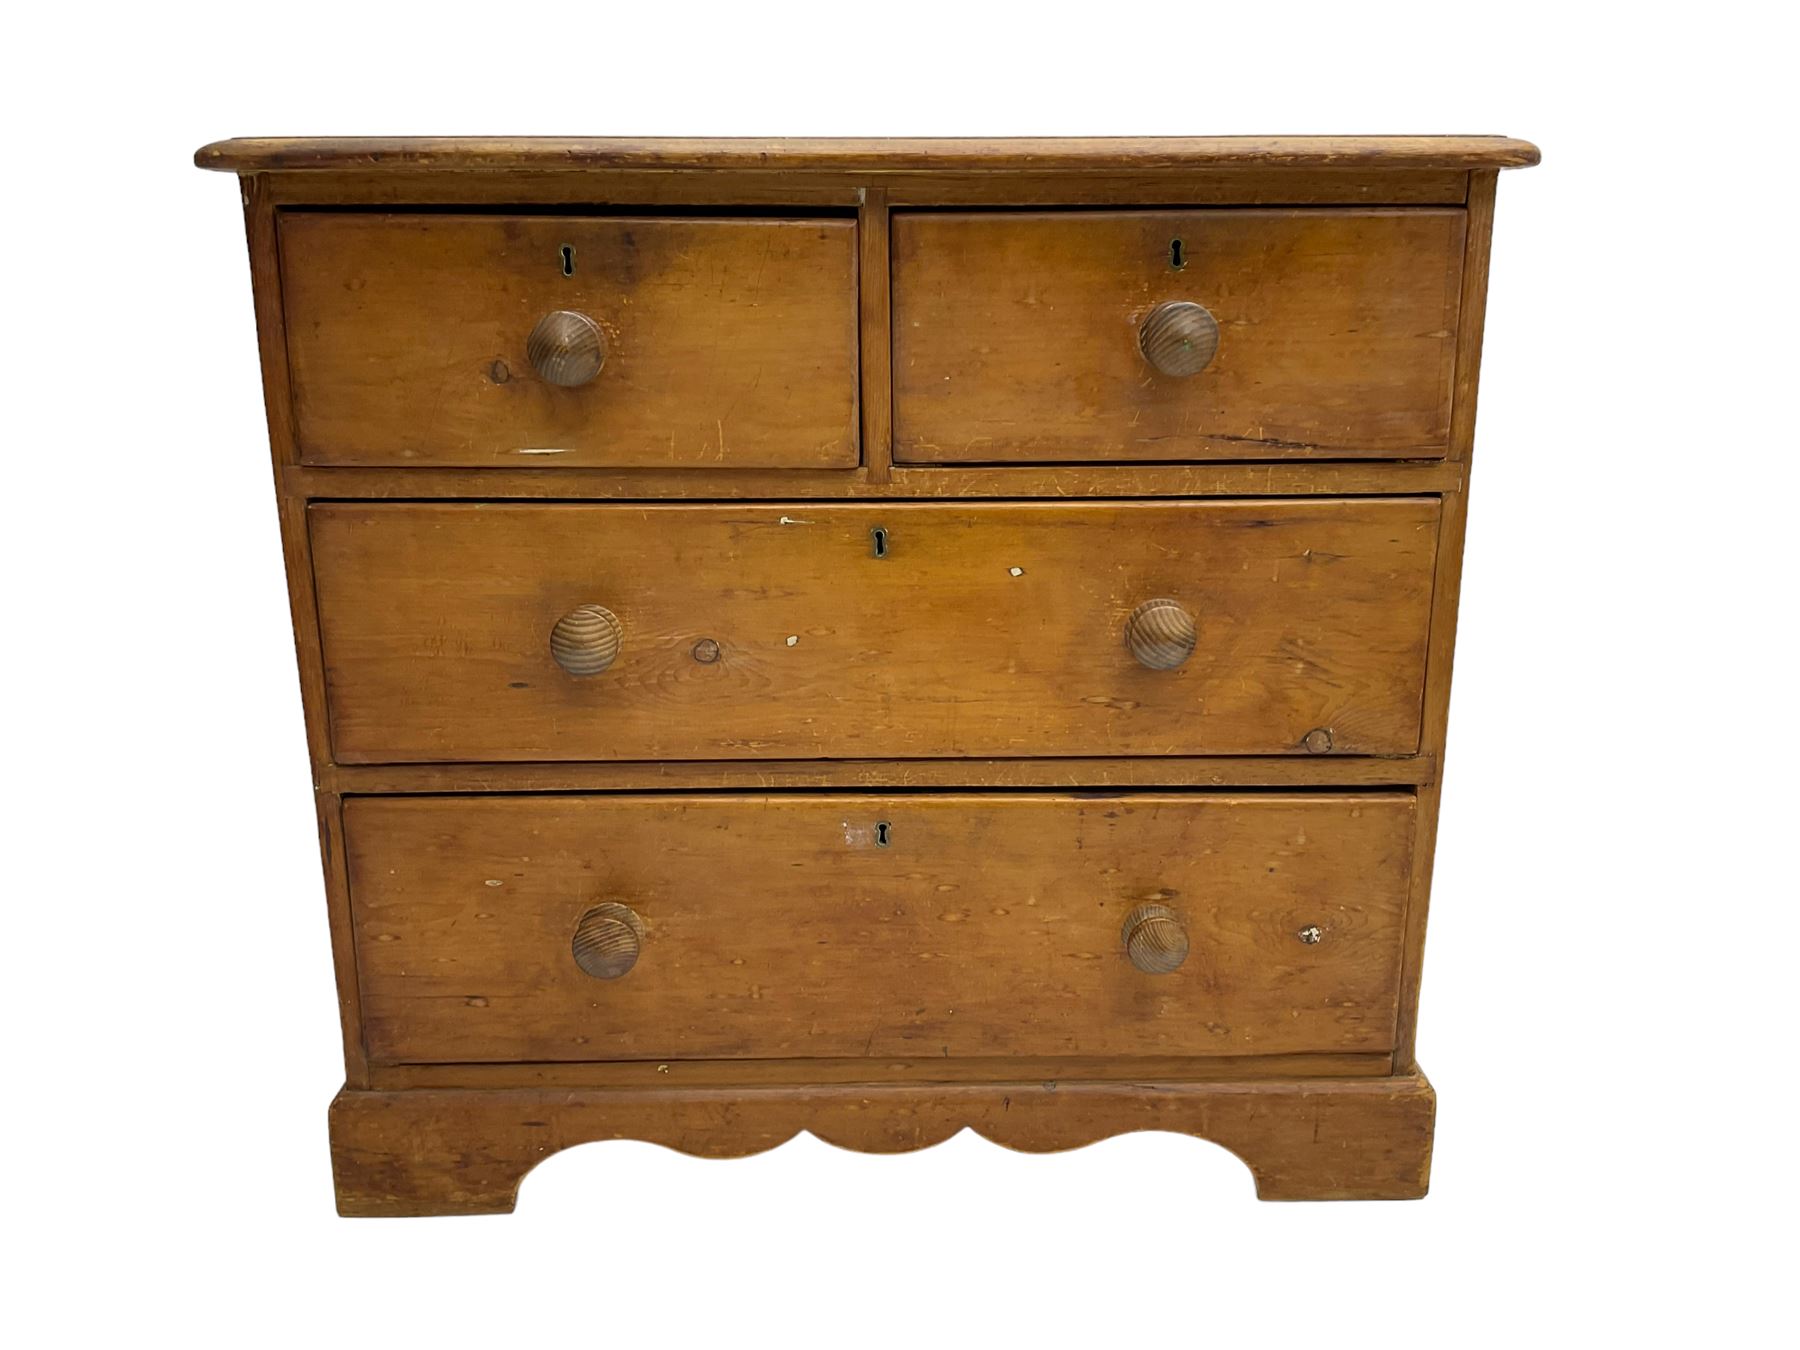 Late 19th century waxed pine chest - Image 3 of 8